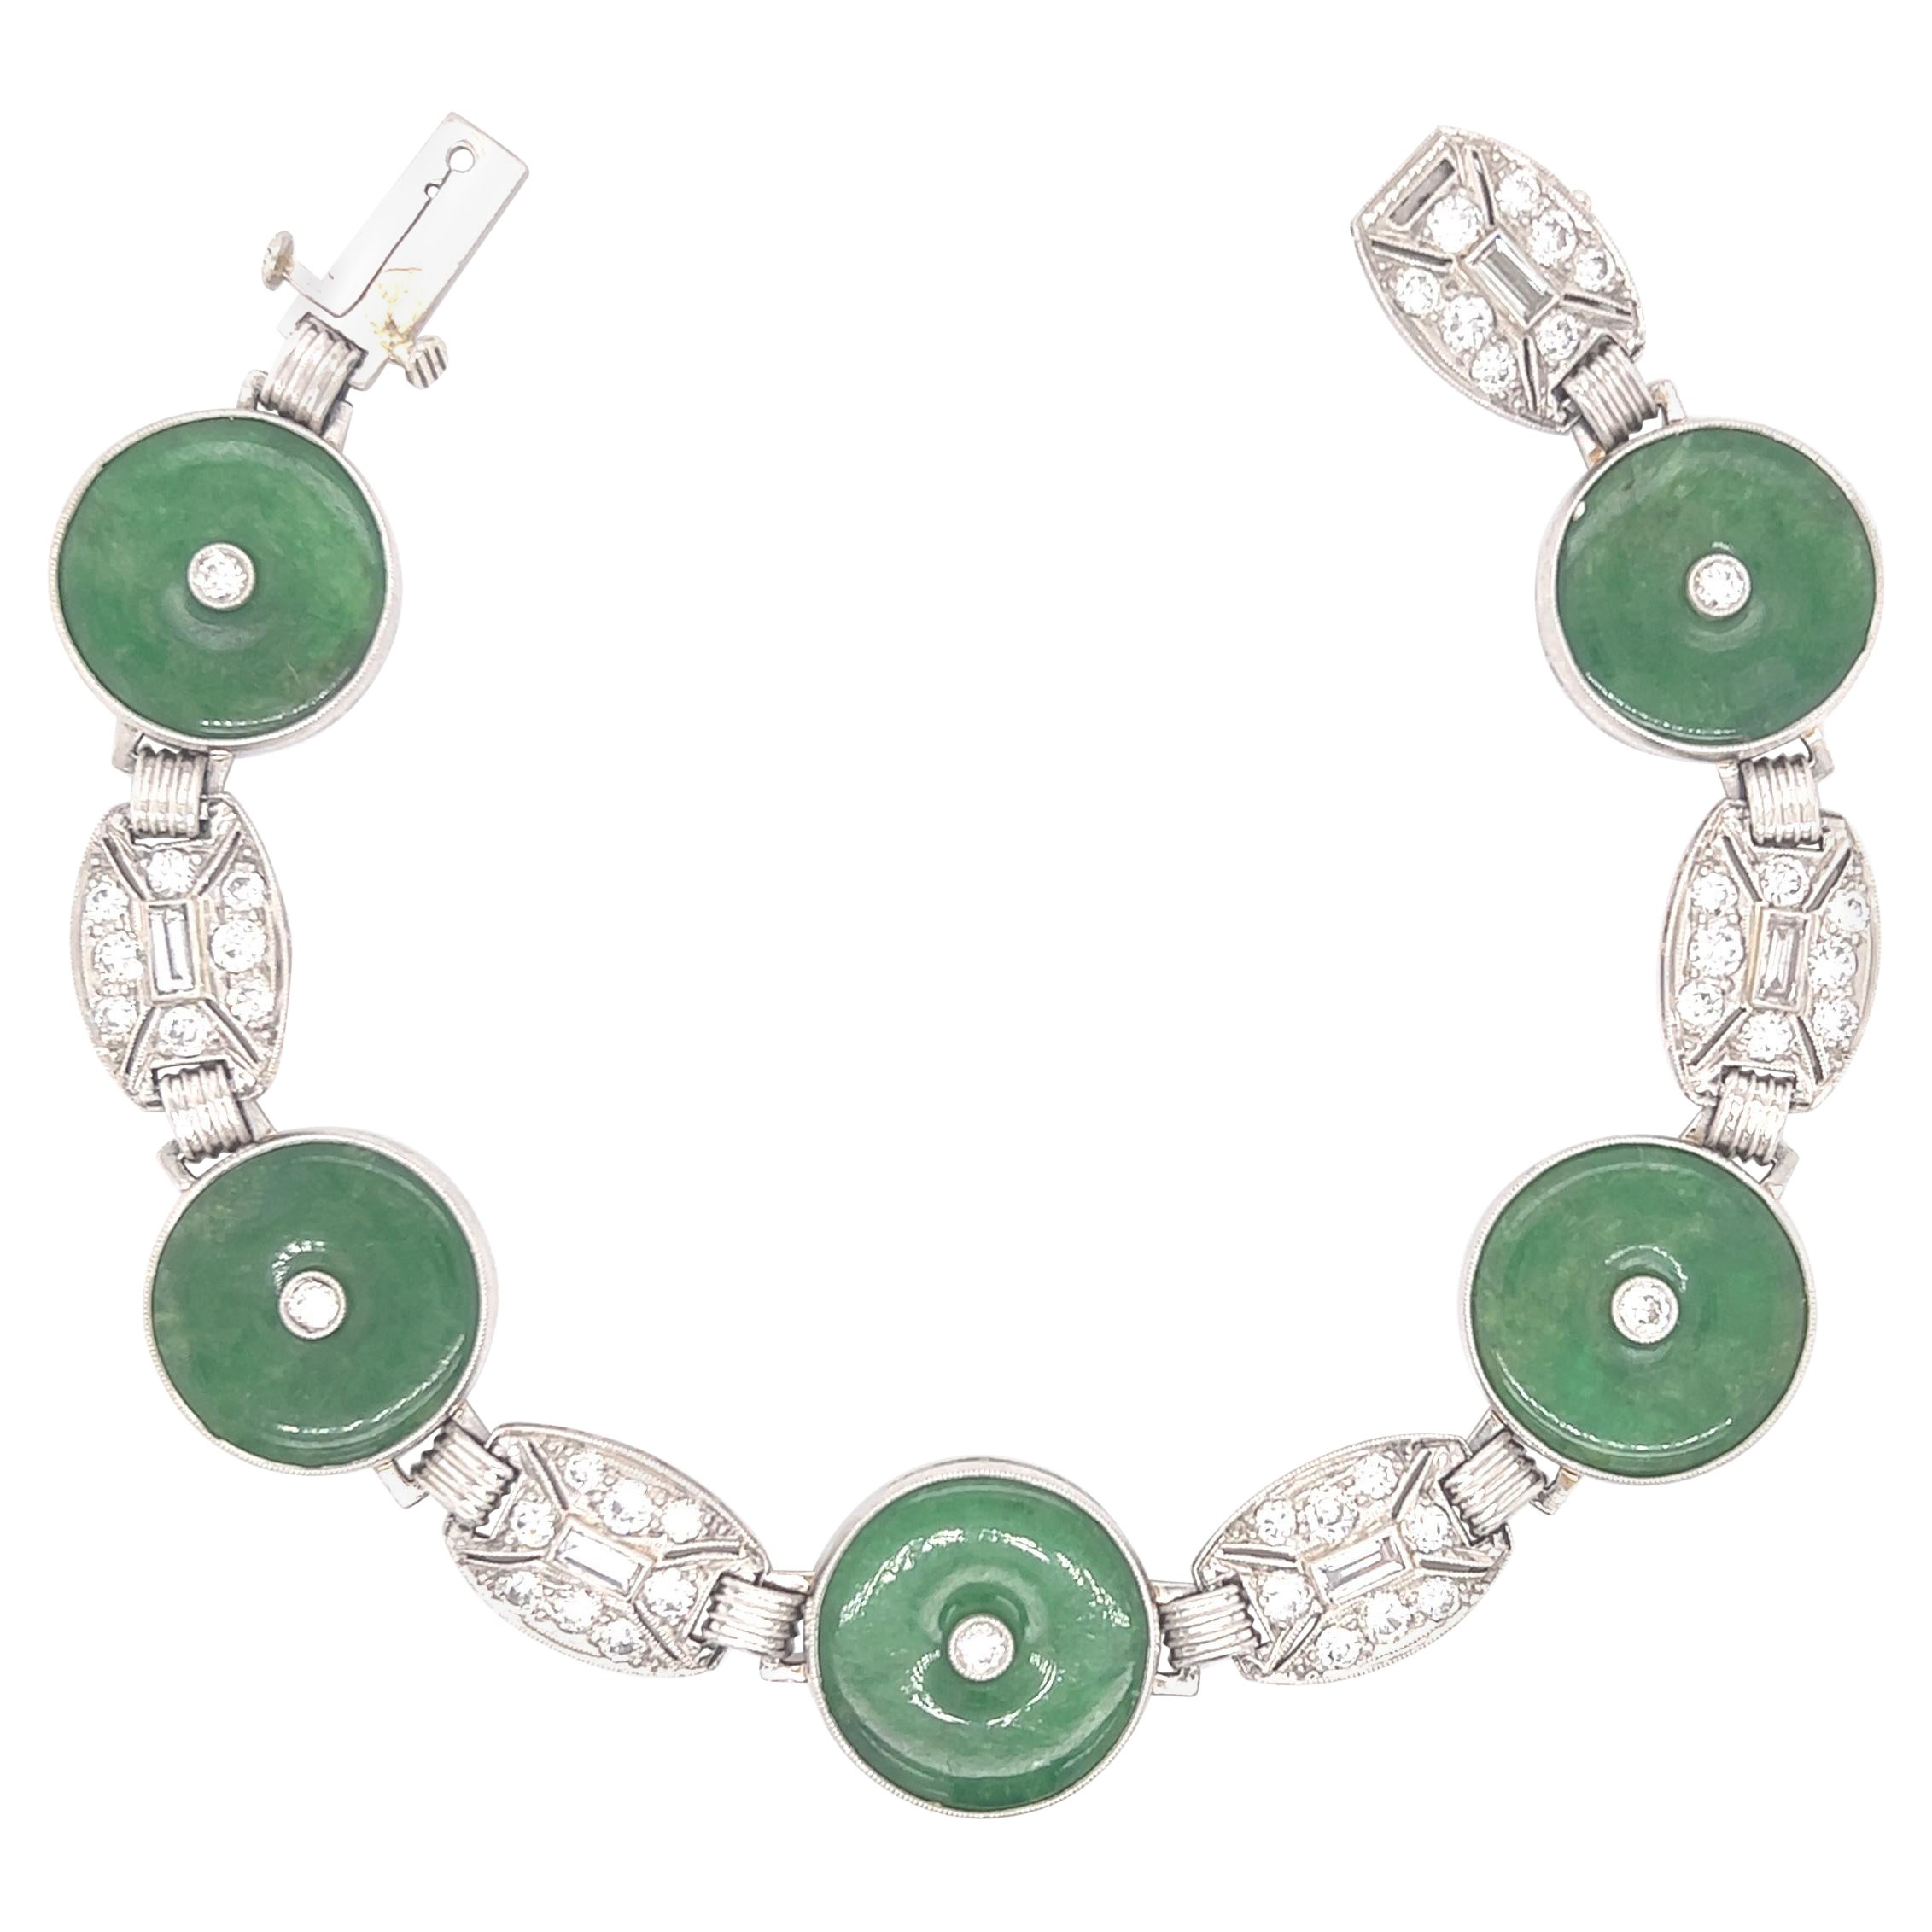 Beautiful Art Deco bracelet crafted in platinum. The bracelet is highlighted with five hololith shaped jade gemstones. The gemstones contain no impregnation and are 100% natural and earth mined. The jade gemstones display a vibrant green color that